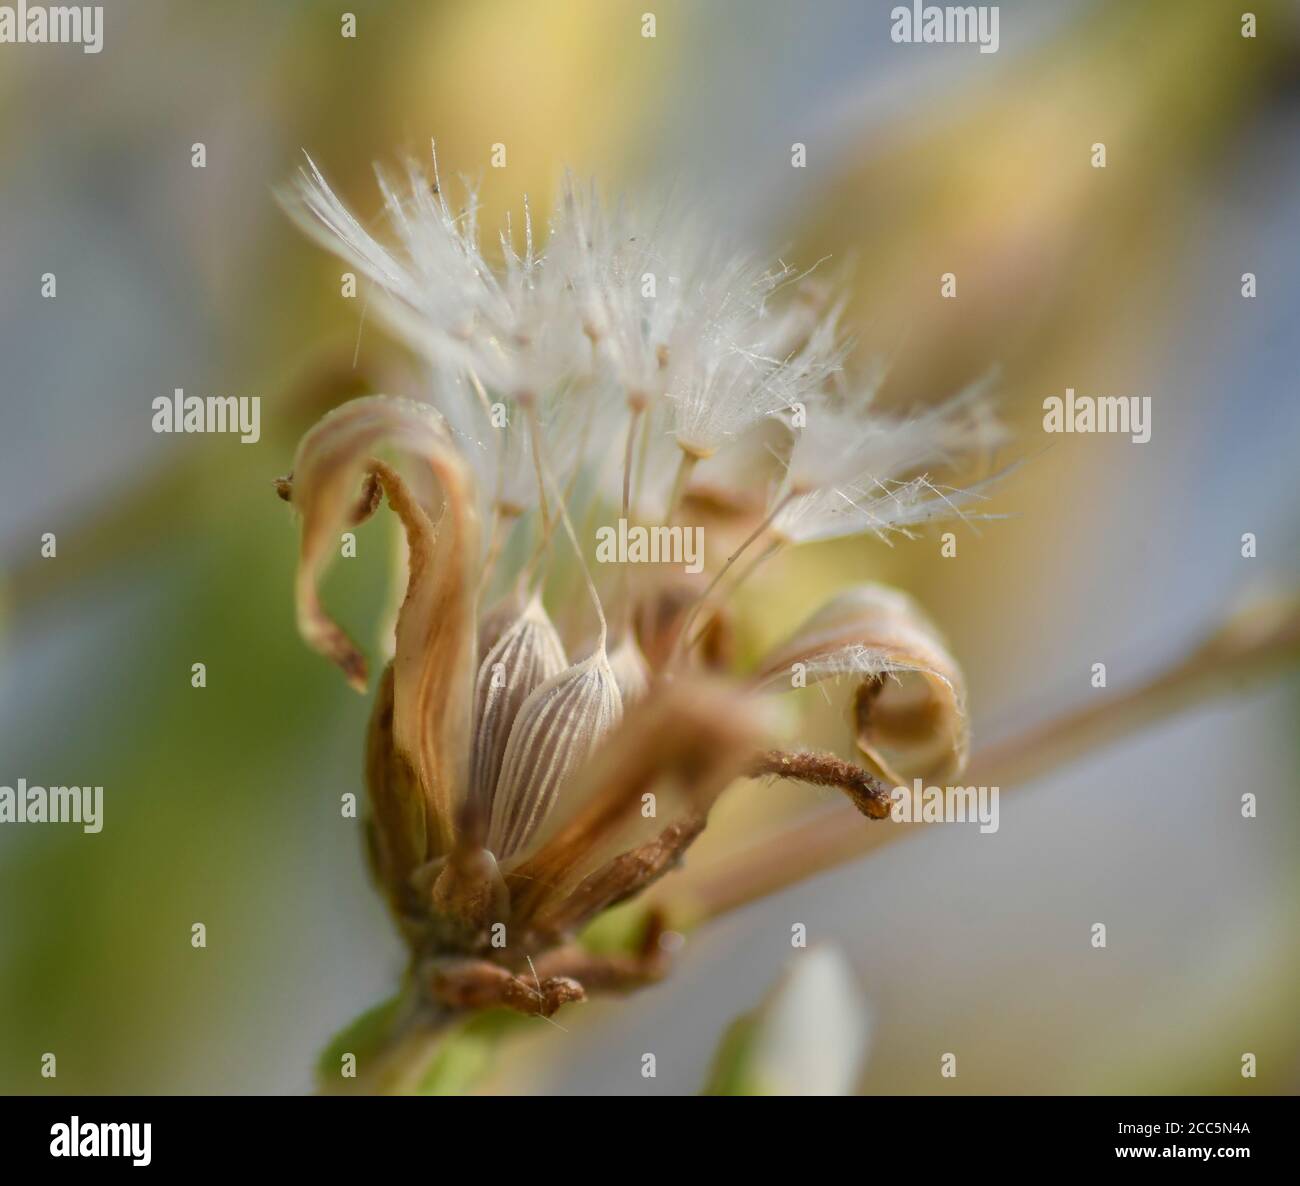 Macrophotography of lettuce seeds in their flower Stock Photo